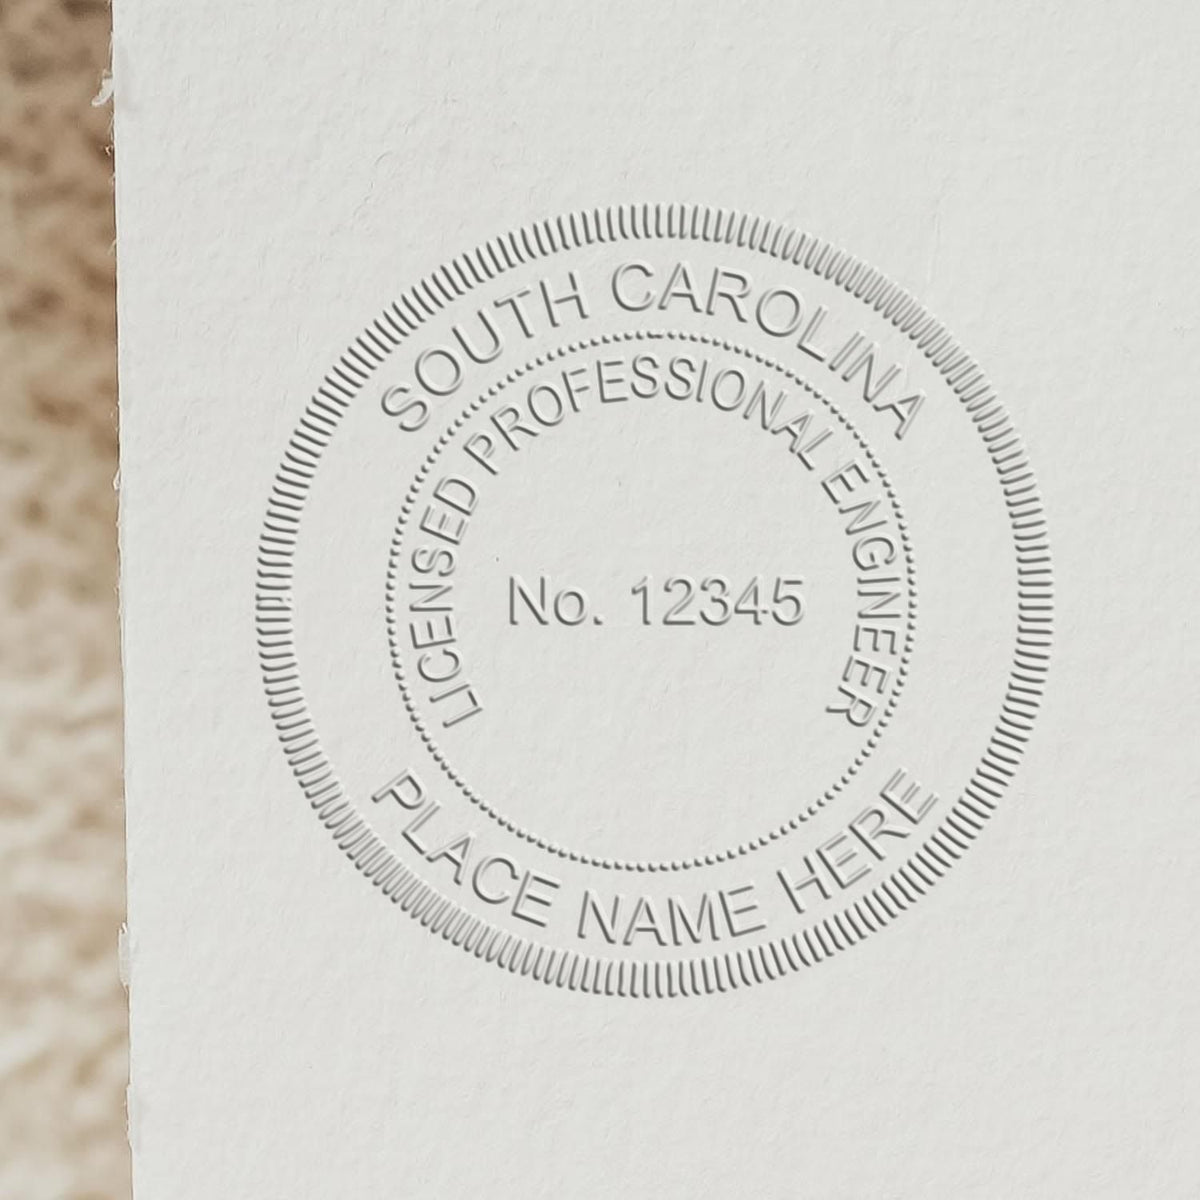 An in use photo of the Hybrid South Carolina Engineer Seal showing a sample imprint on a cardstock